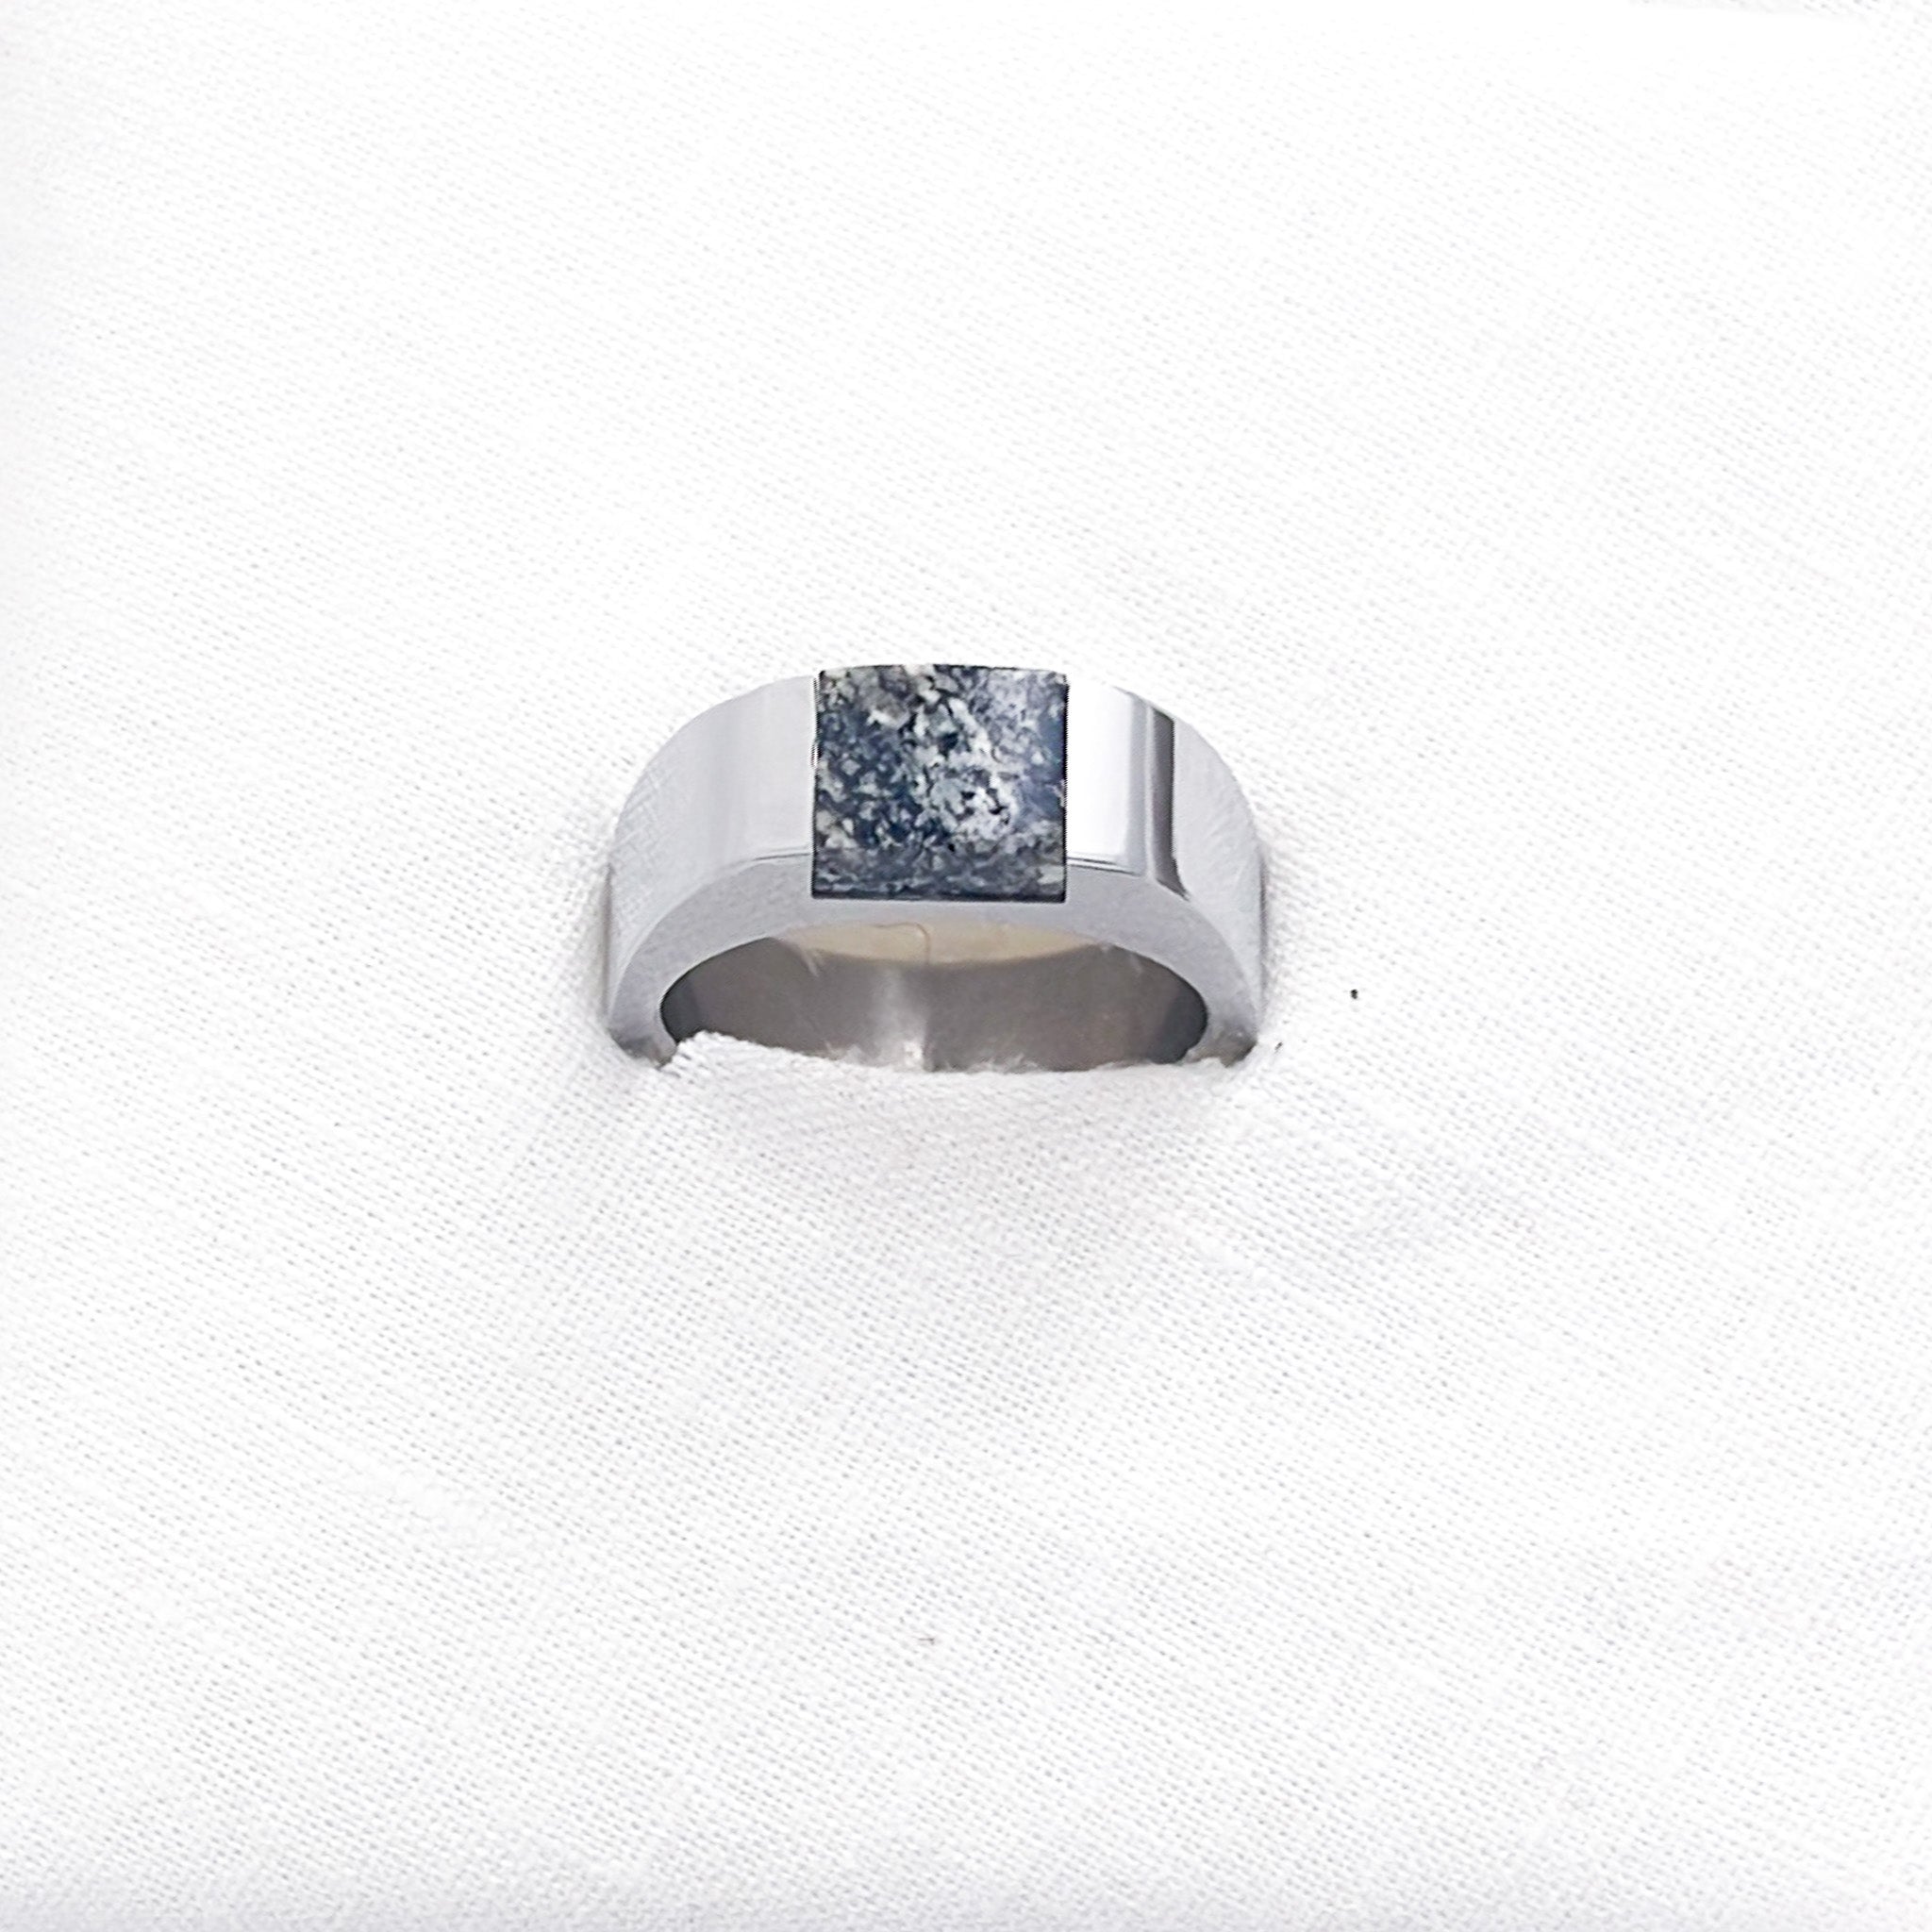 A stainless steel signet ring with an inset black granite stone